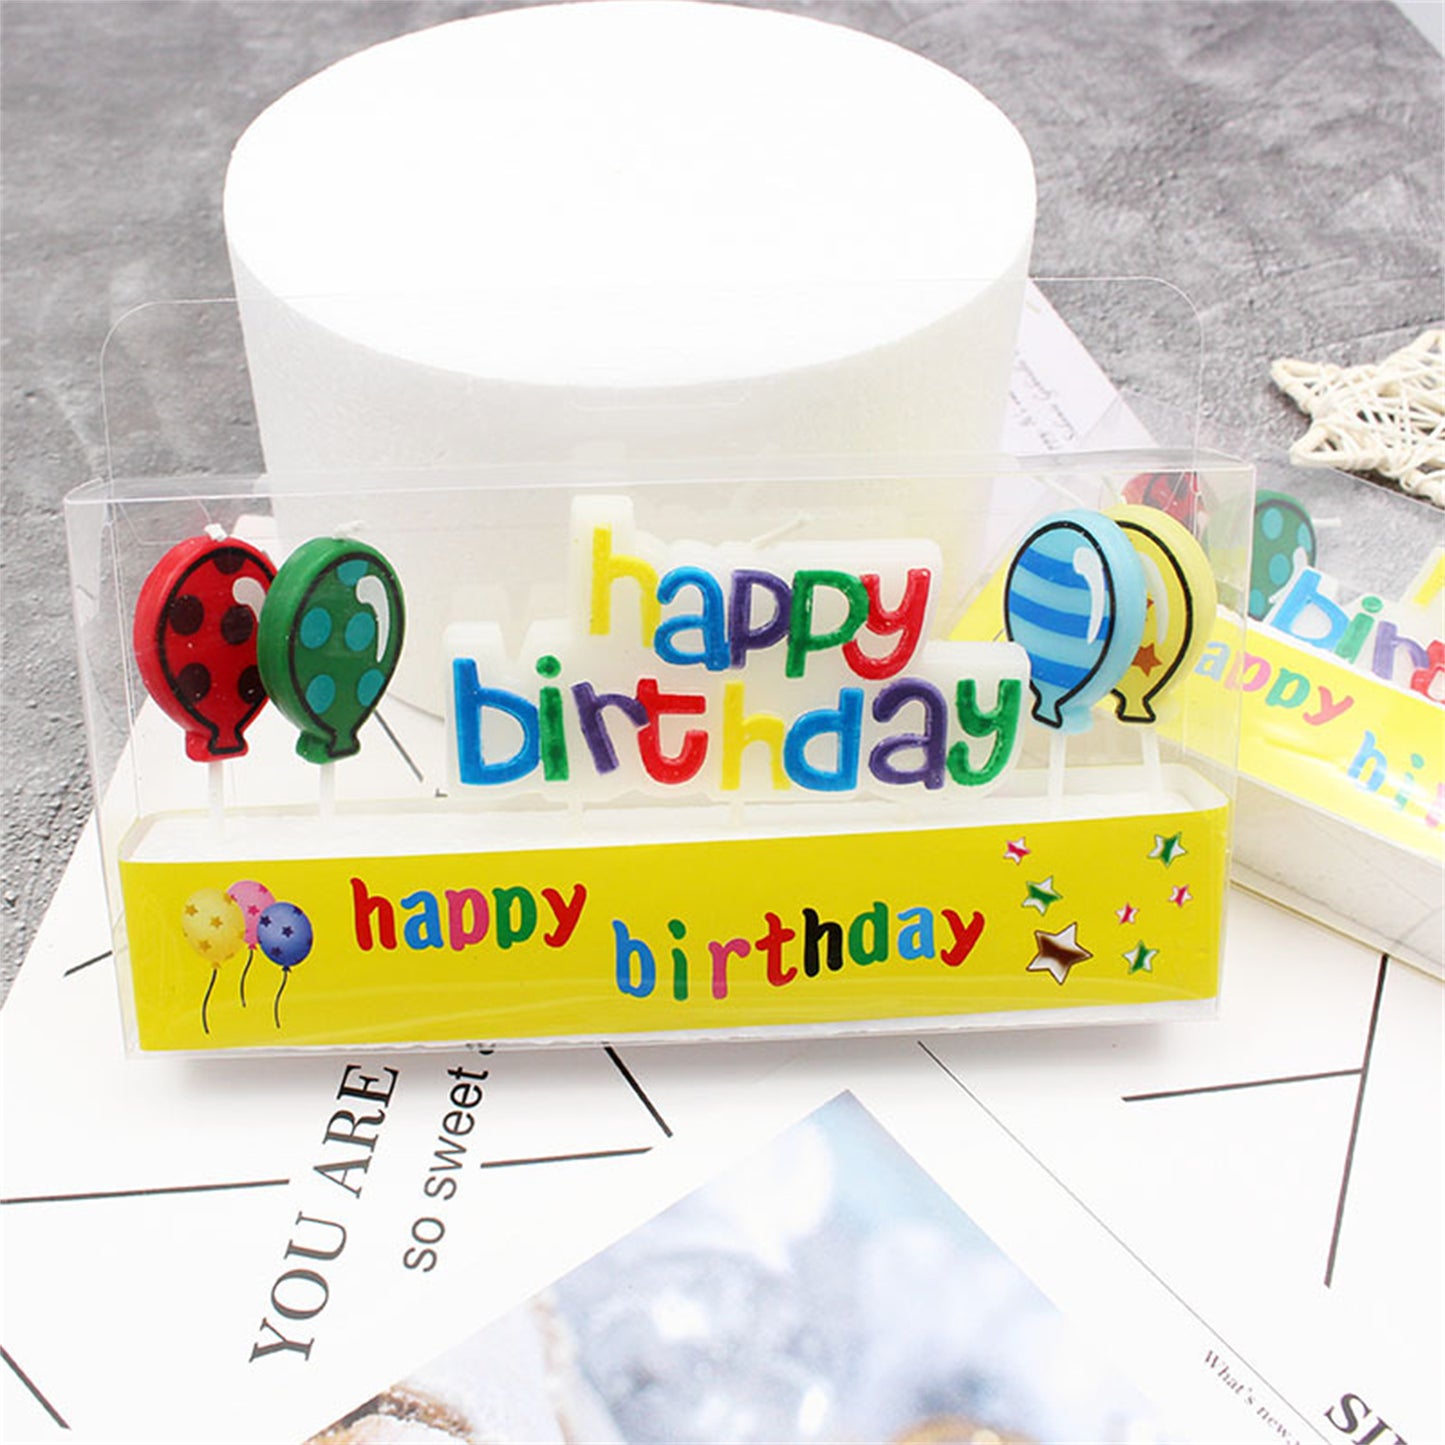 Happy birthday letter candle balloon set candle